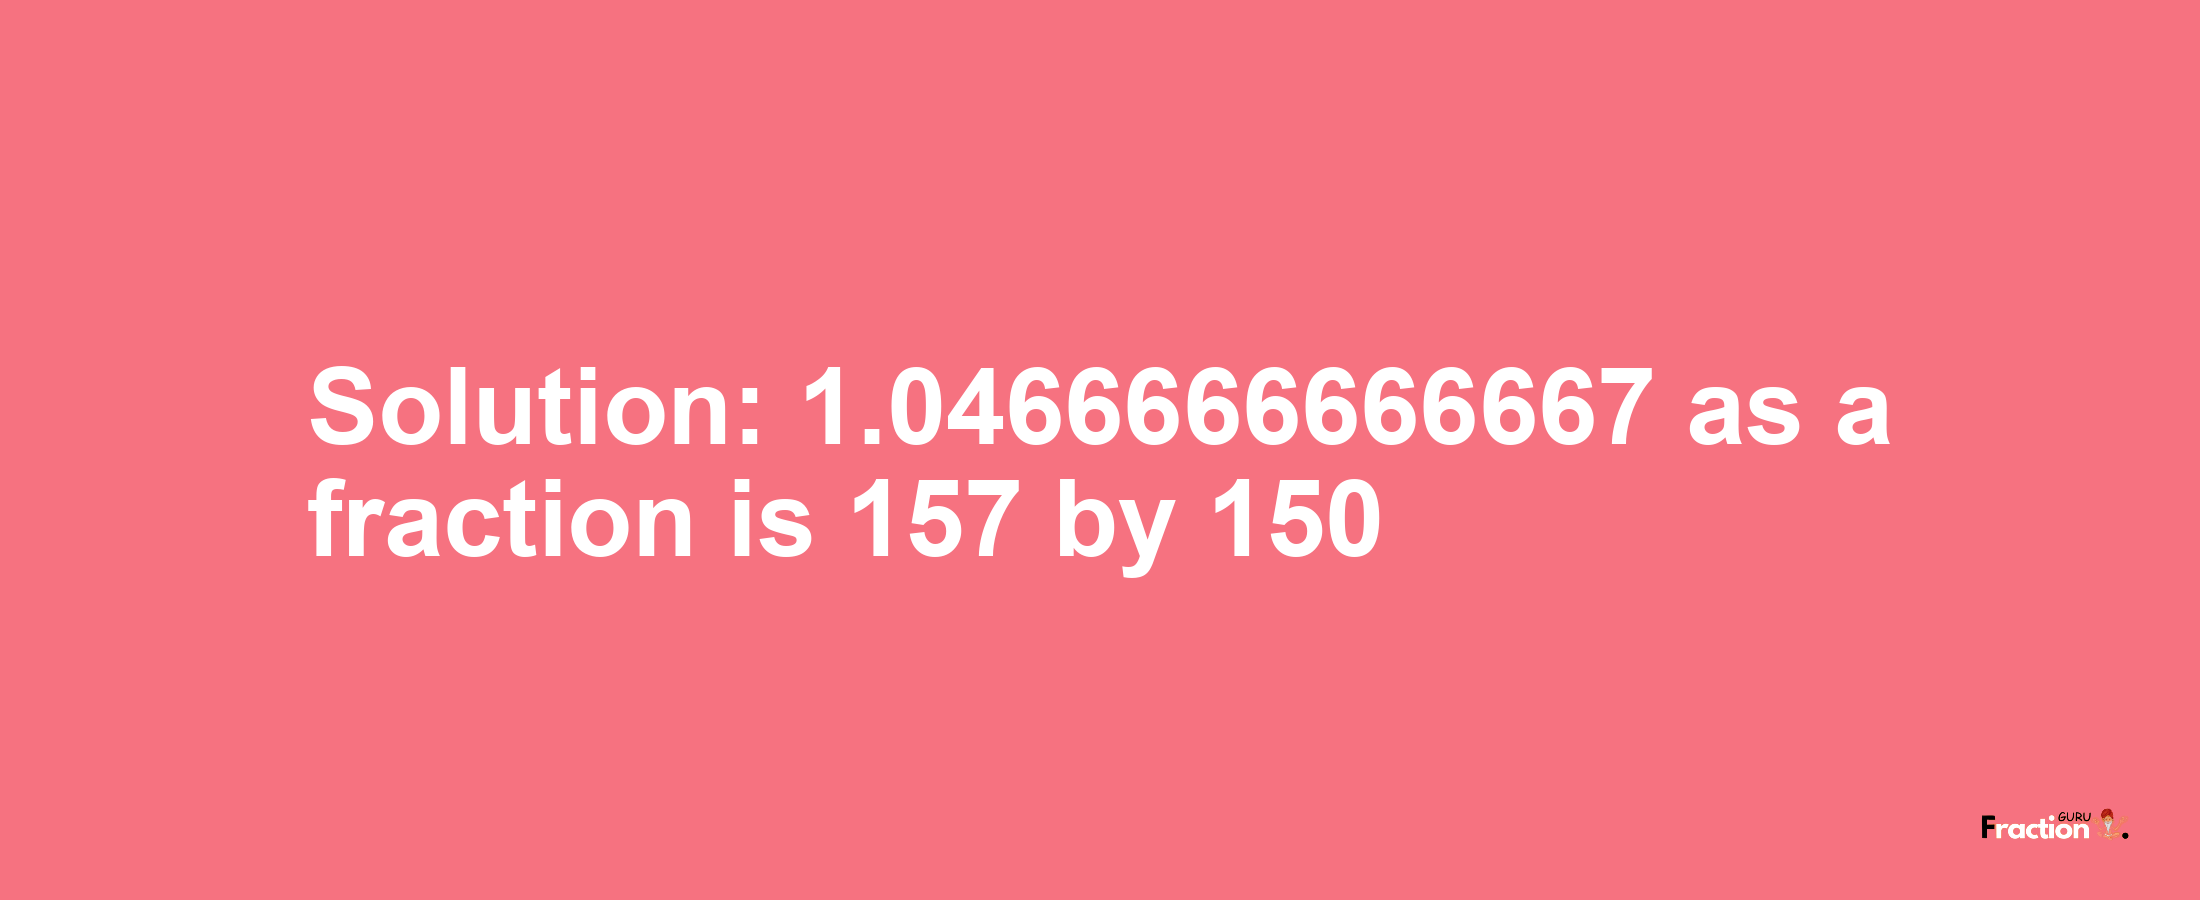 Solution:1.0466666666667 as a fraction is 157/150